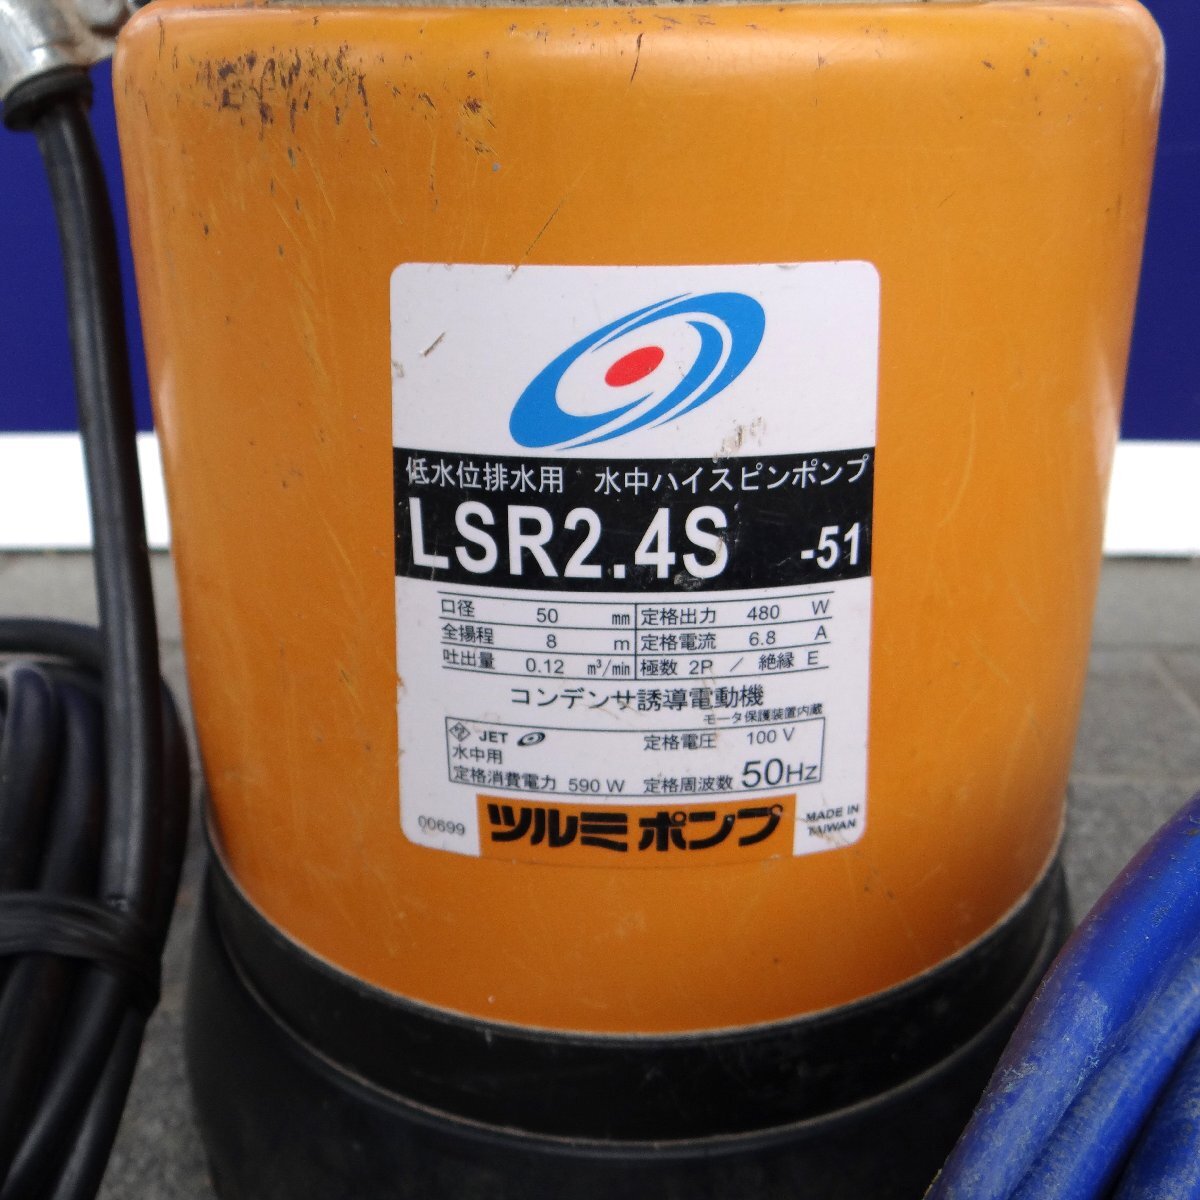 *....* secondhand goods * Tsurumi pump low water rank drainage for underwater high spin pump [LSR 2.4S-51]*10